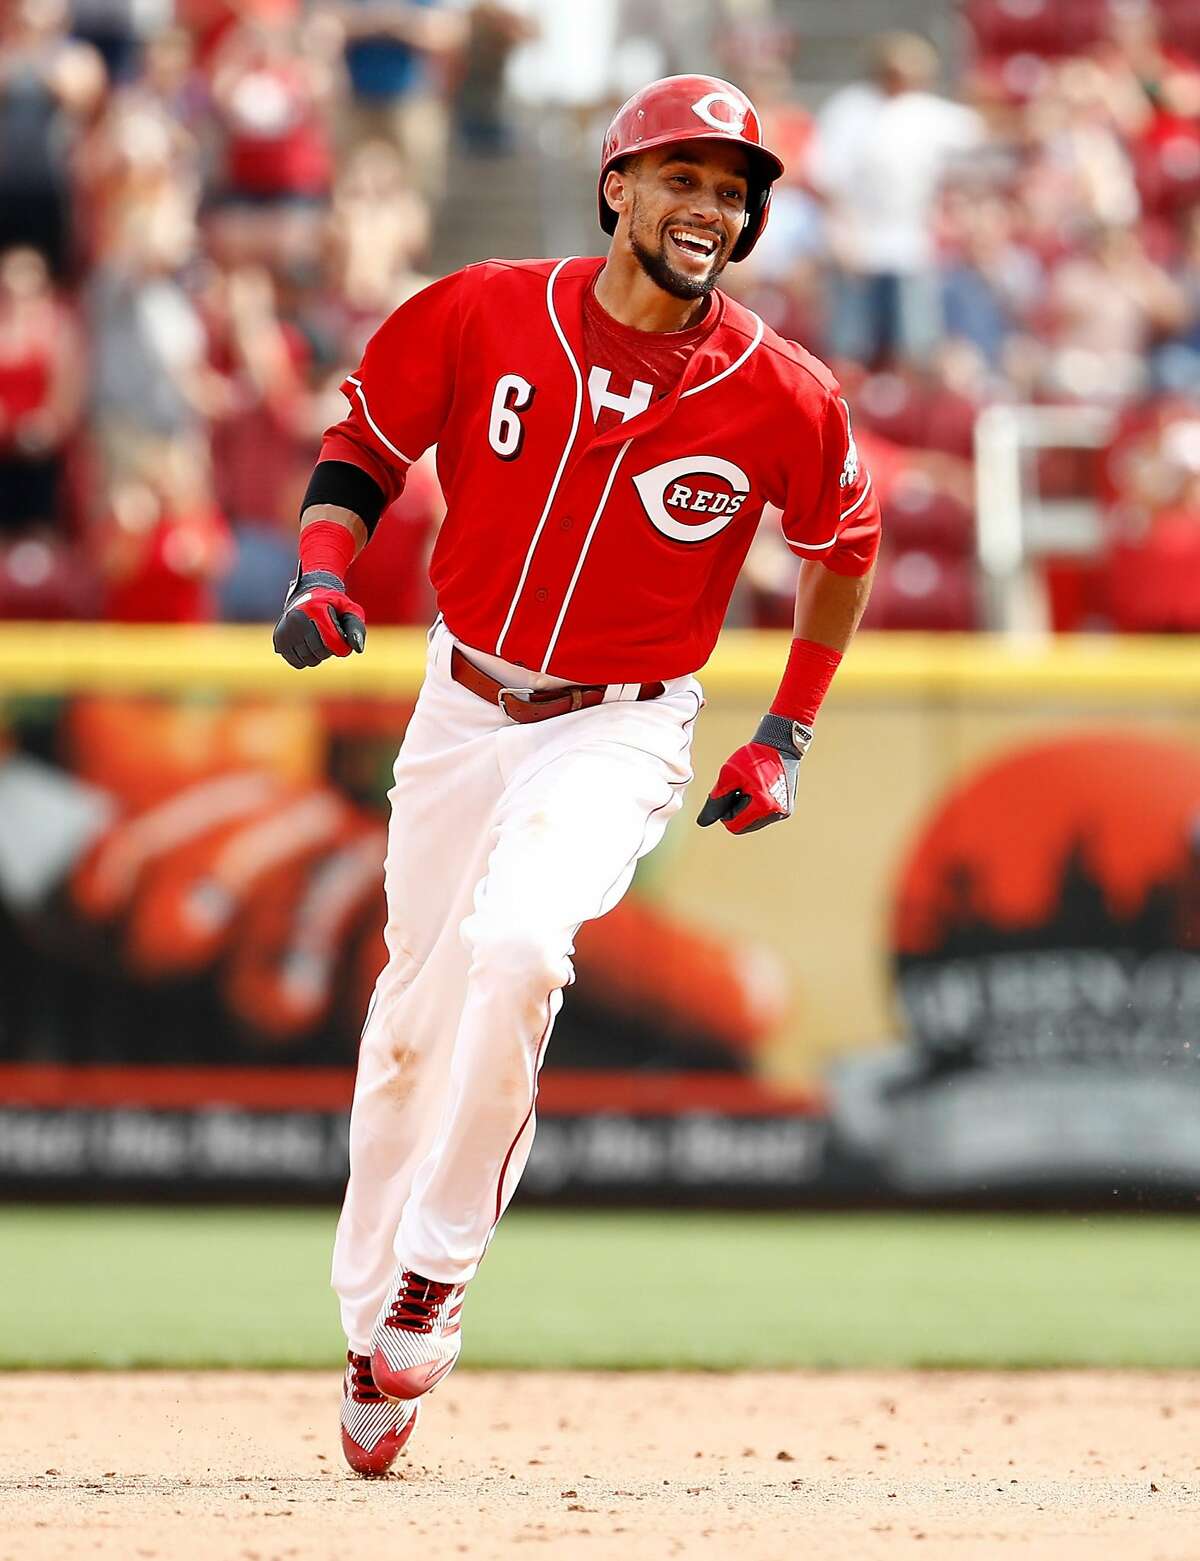 The Giants have had talks with the Reds about center fielder Billy Hamilton.